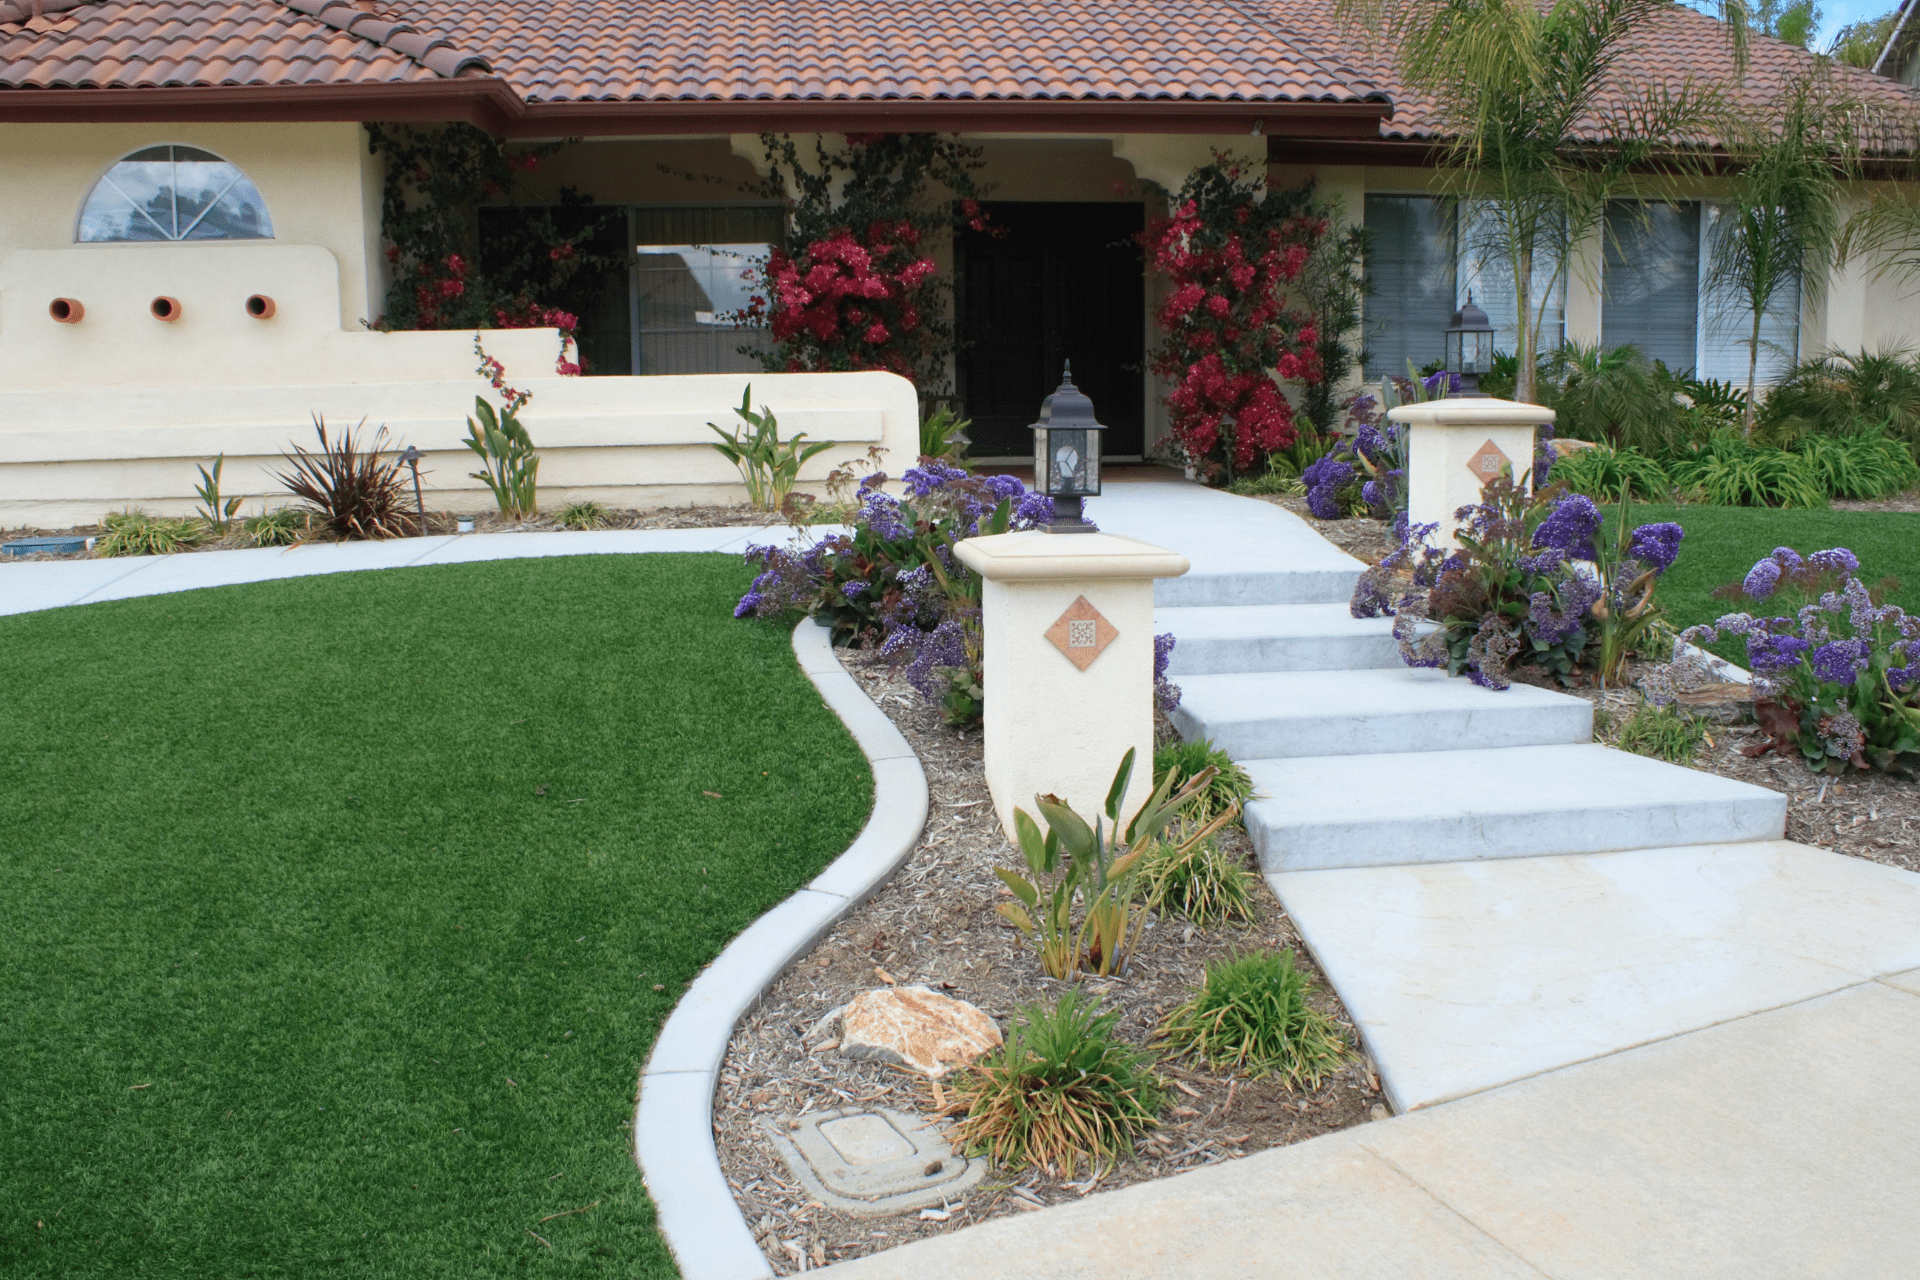 Artificial turf in a front yard in Boise landscaped by Boise Landscaping Company